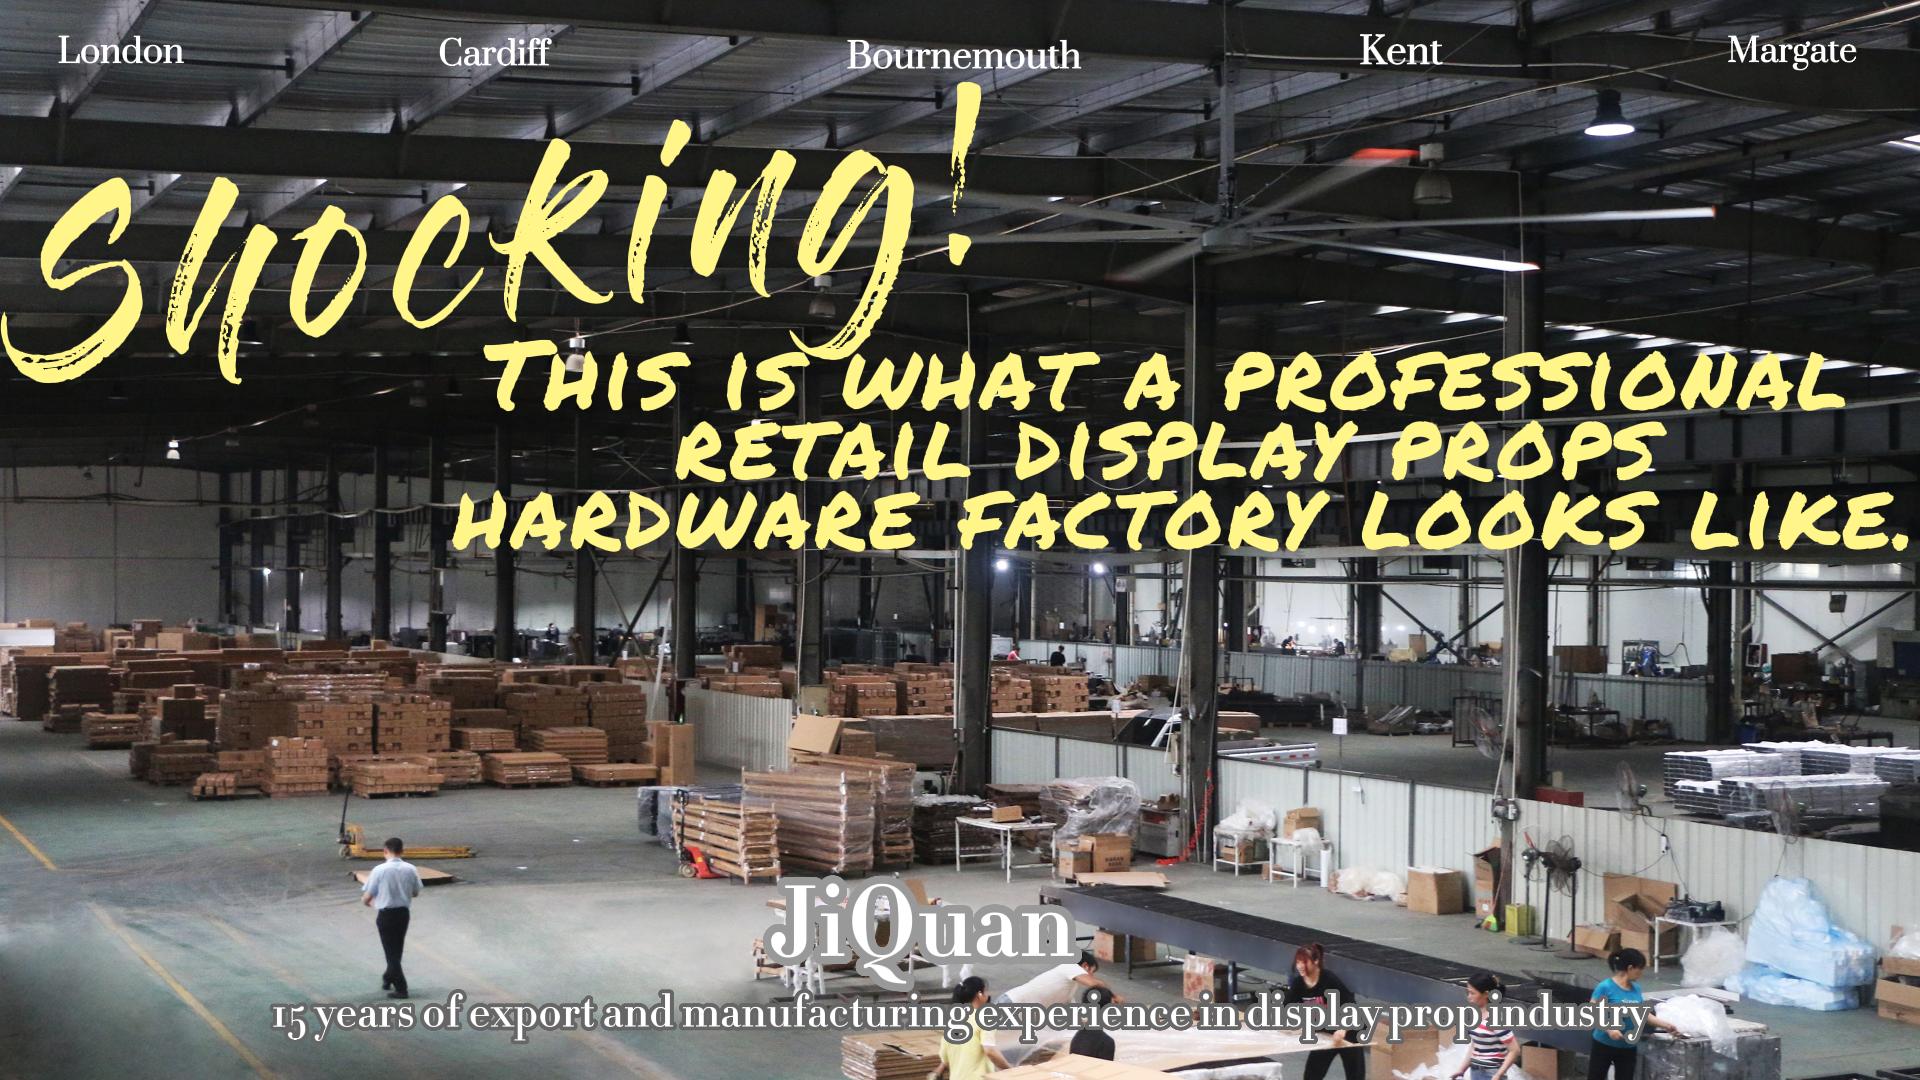 Shocking! This is what a professional retail display props hardware factory looks like